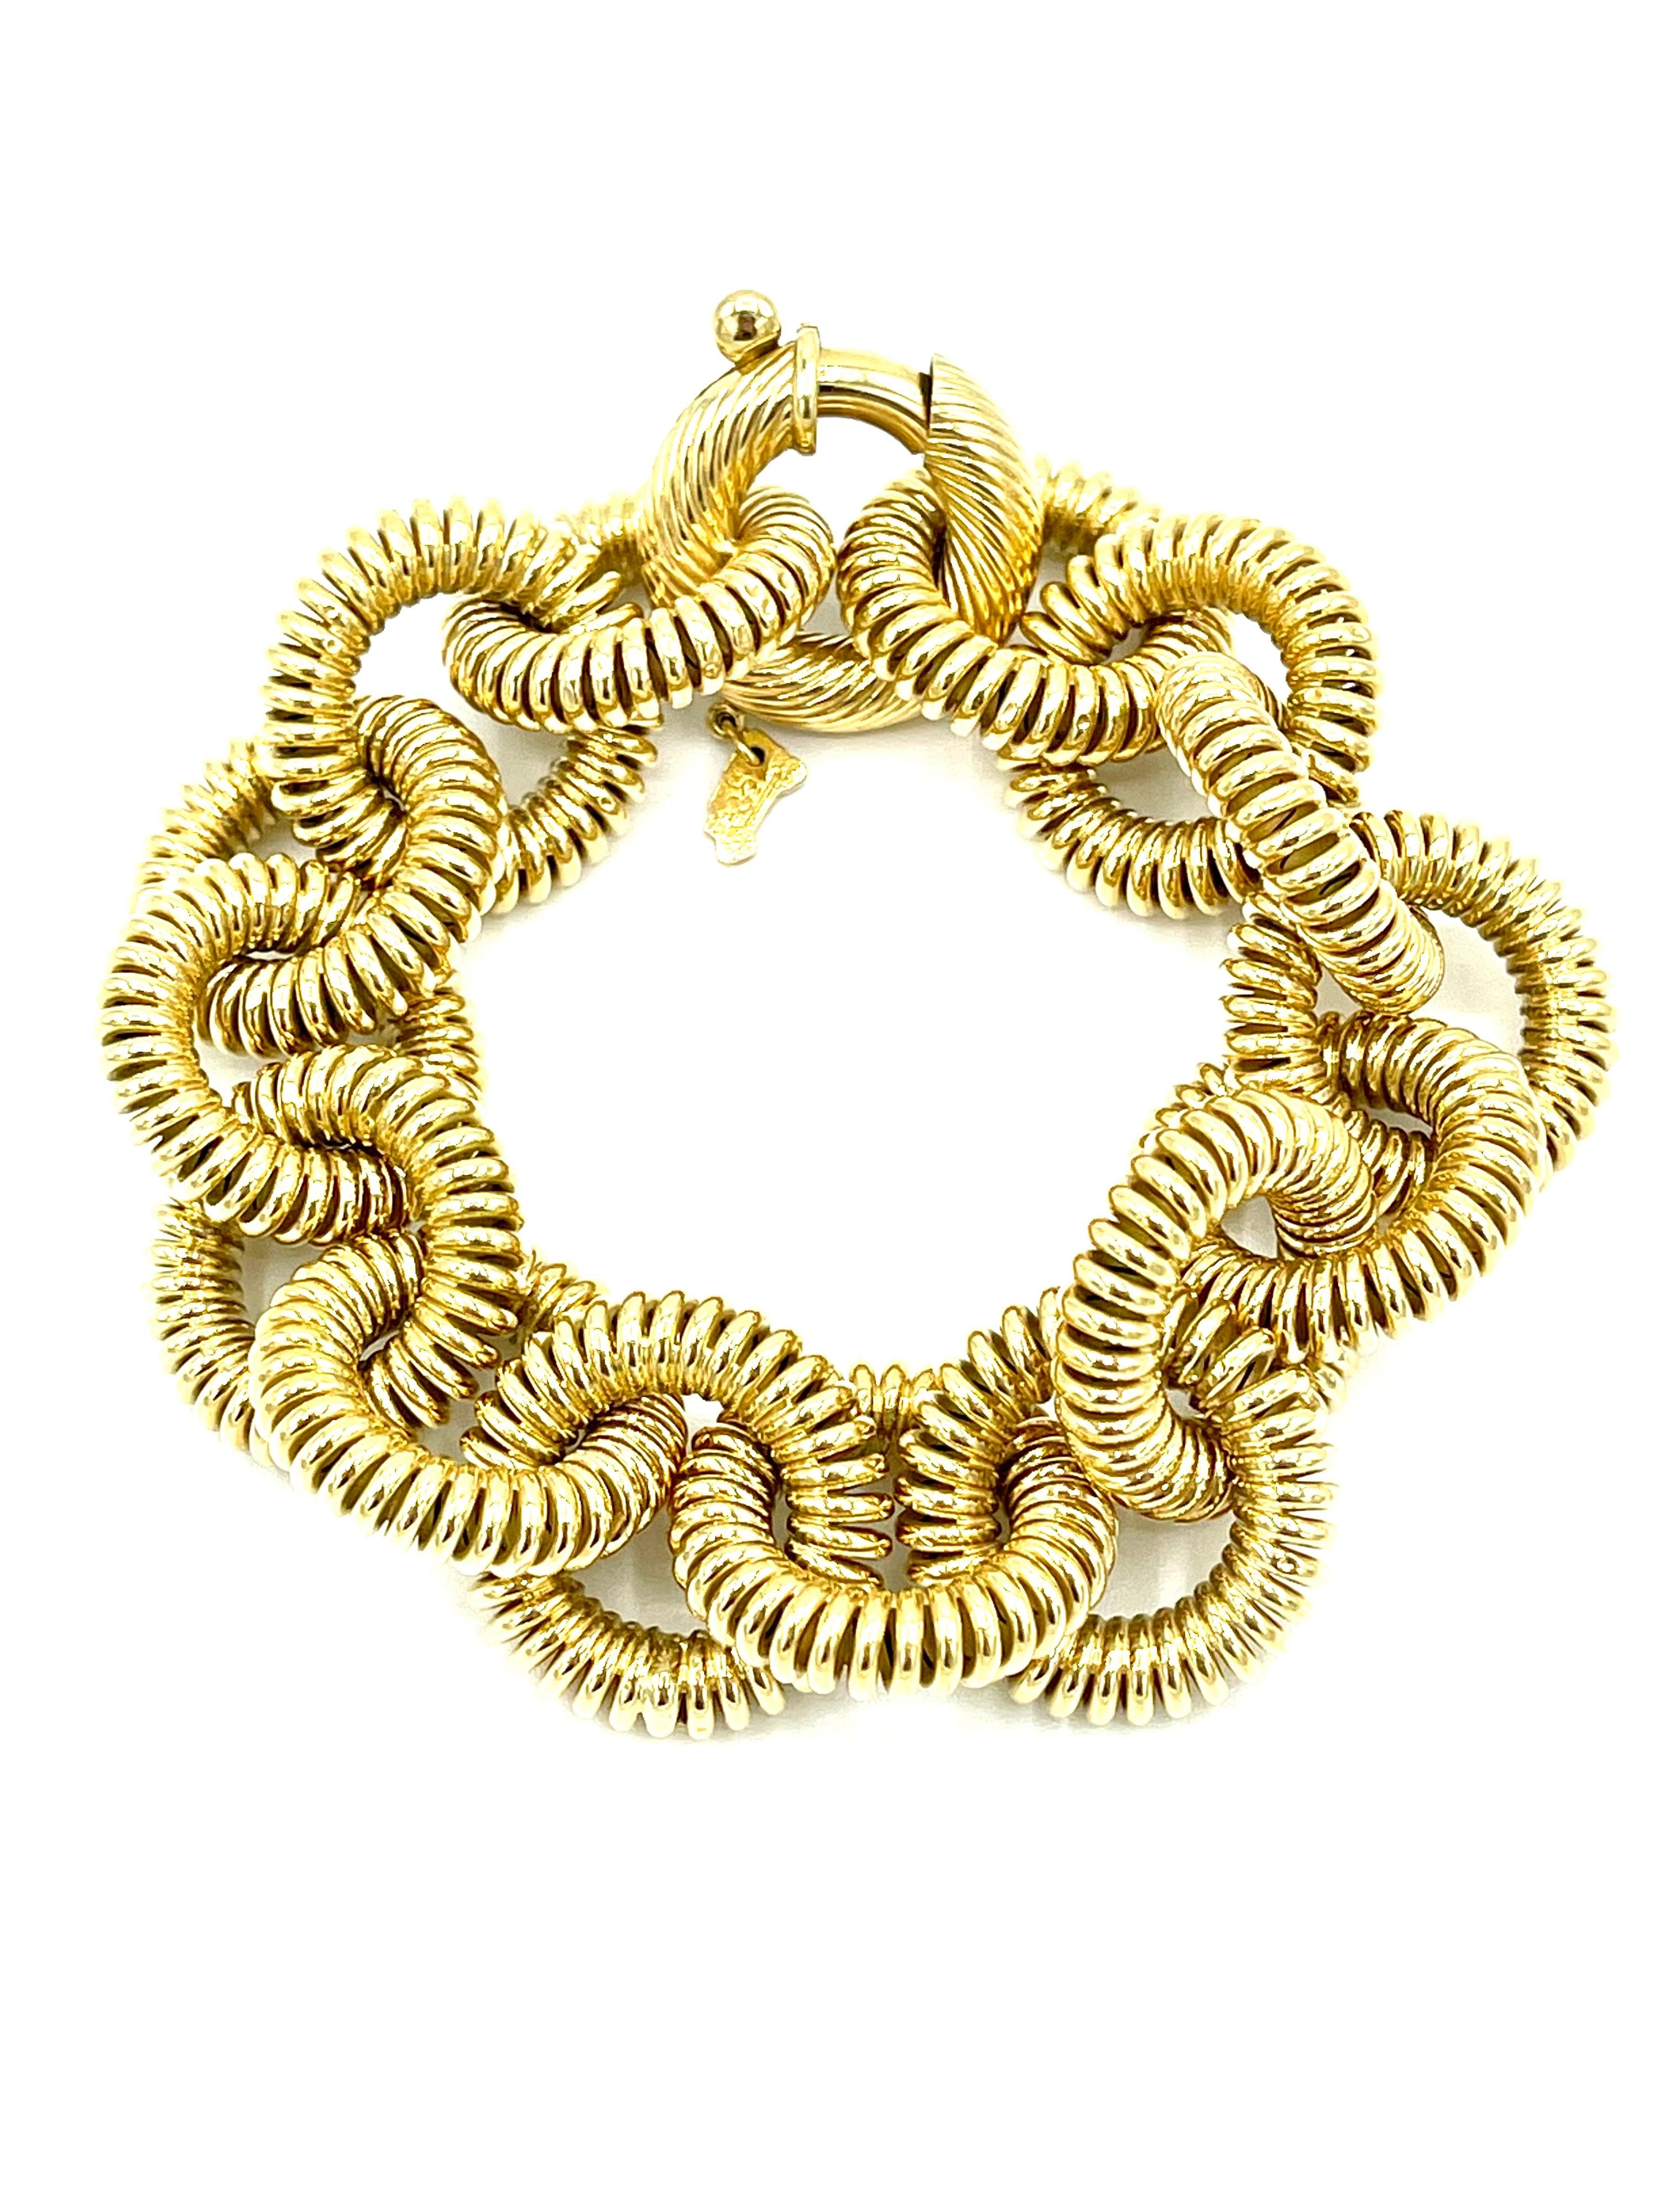 18K Yellow Gold Large Circular Spiral Link Bracelet In Excellent Condition For Sale In Chevy Chase, MD